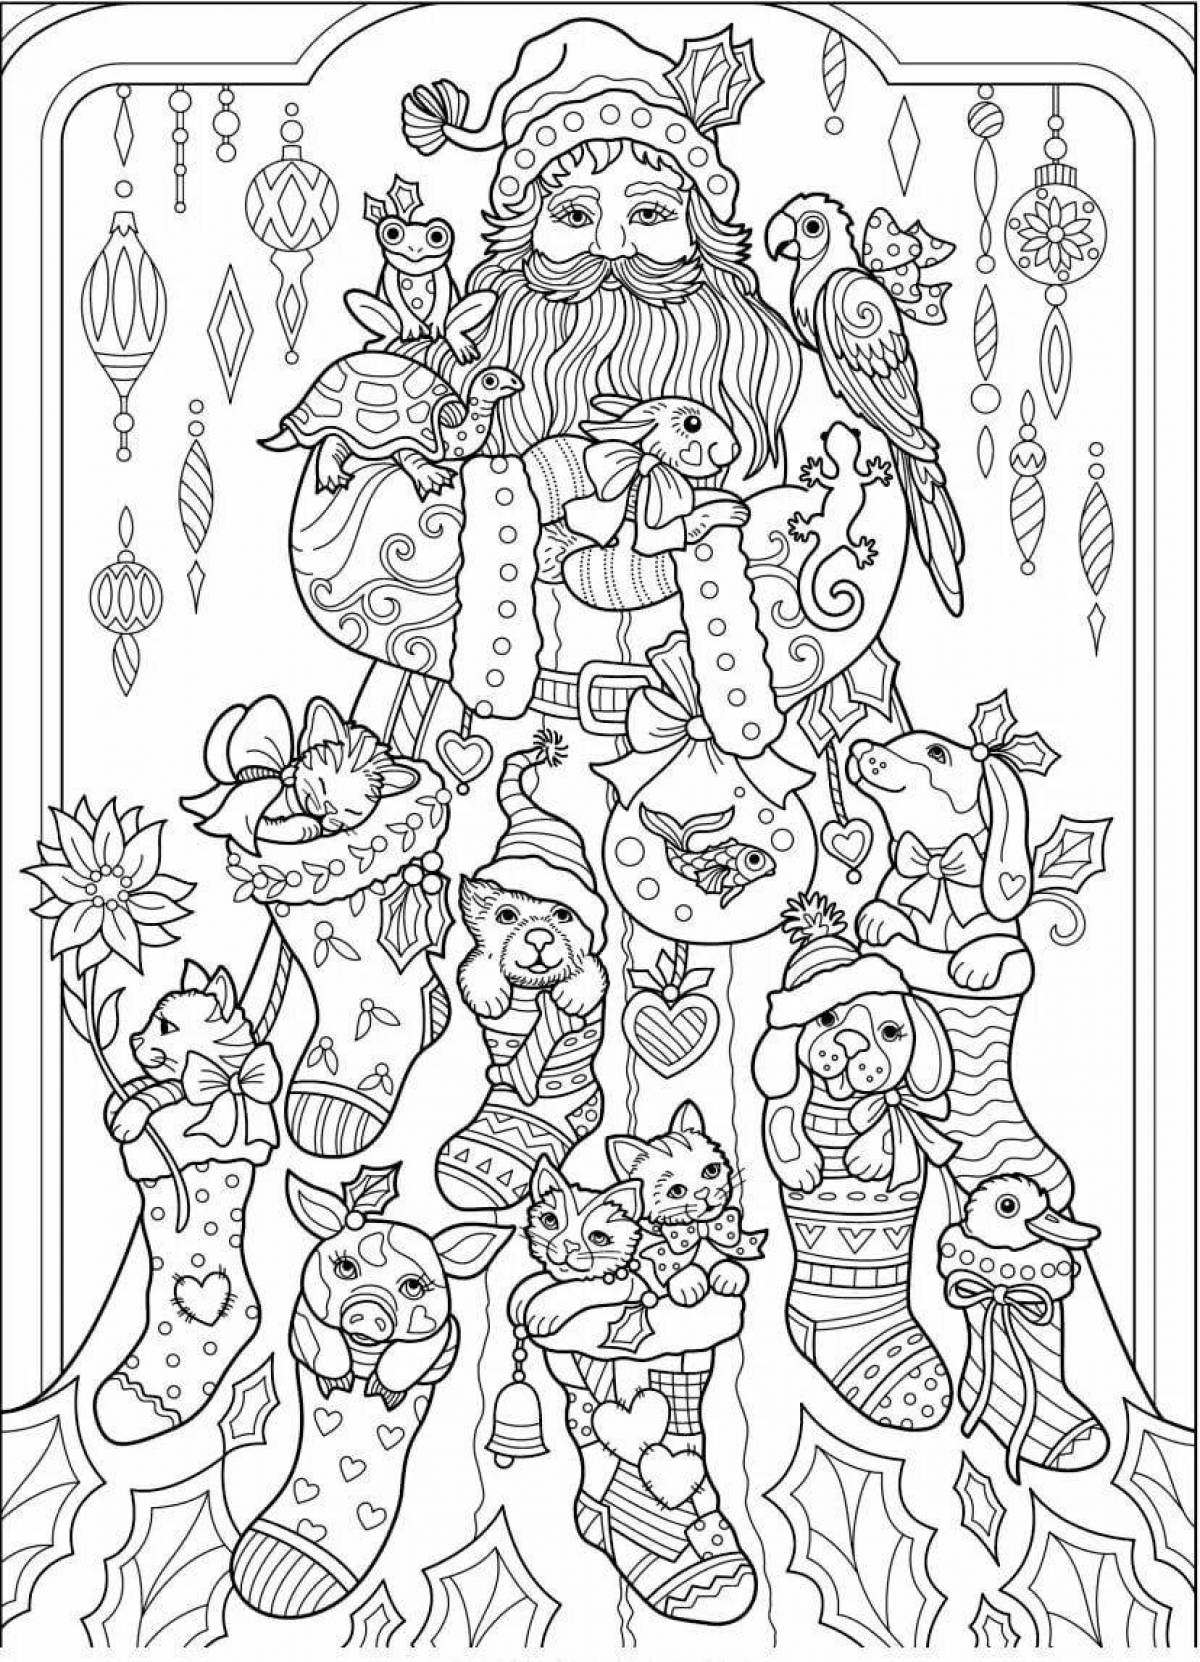 Live Christmas coloring book for adults